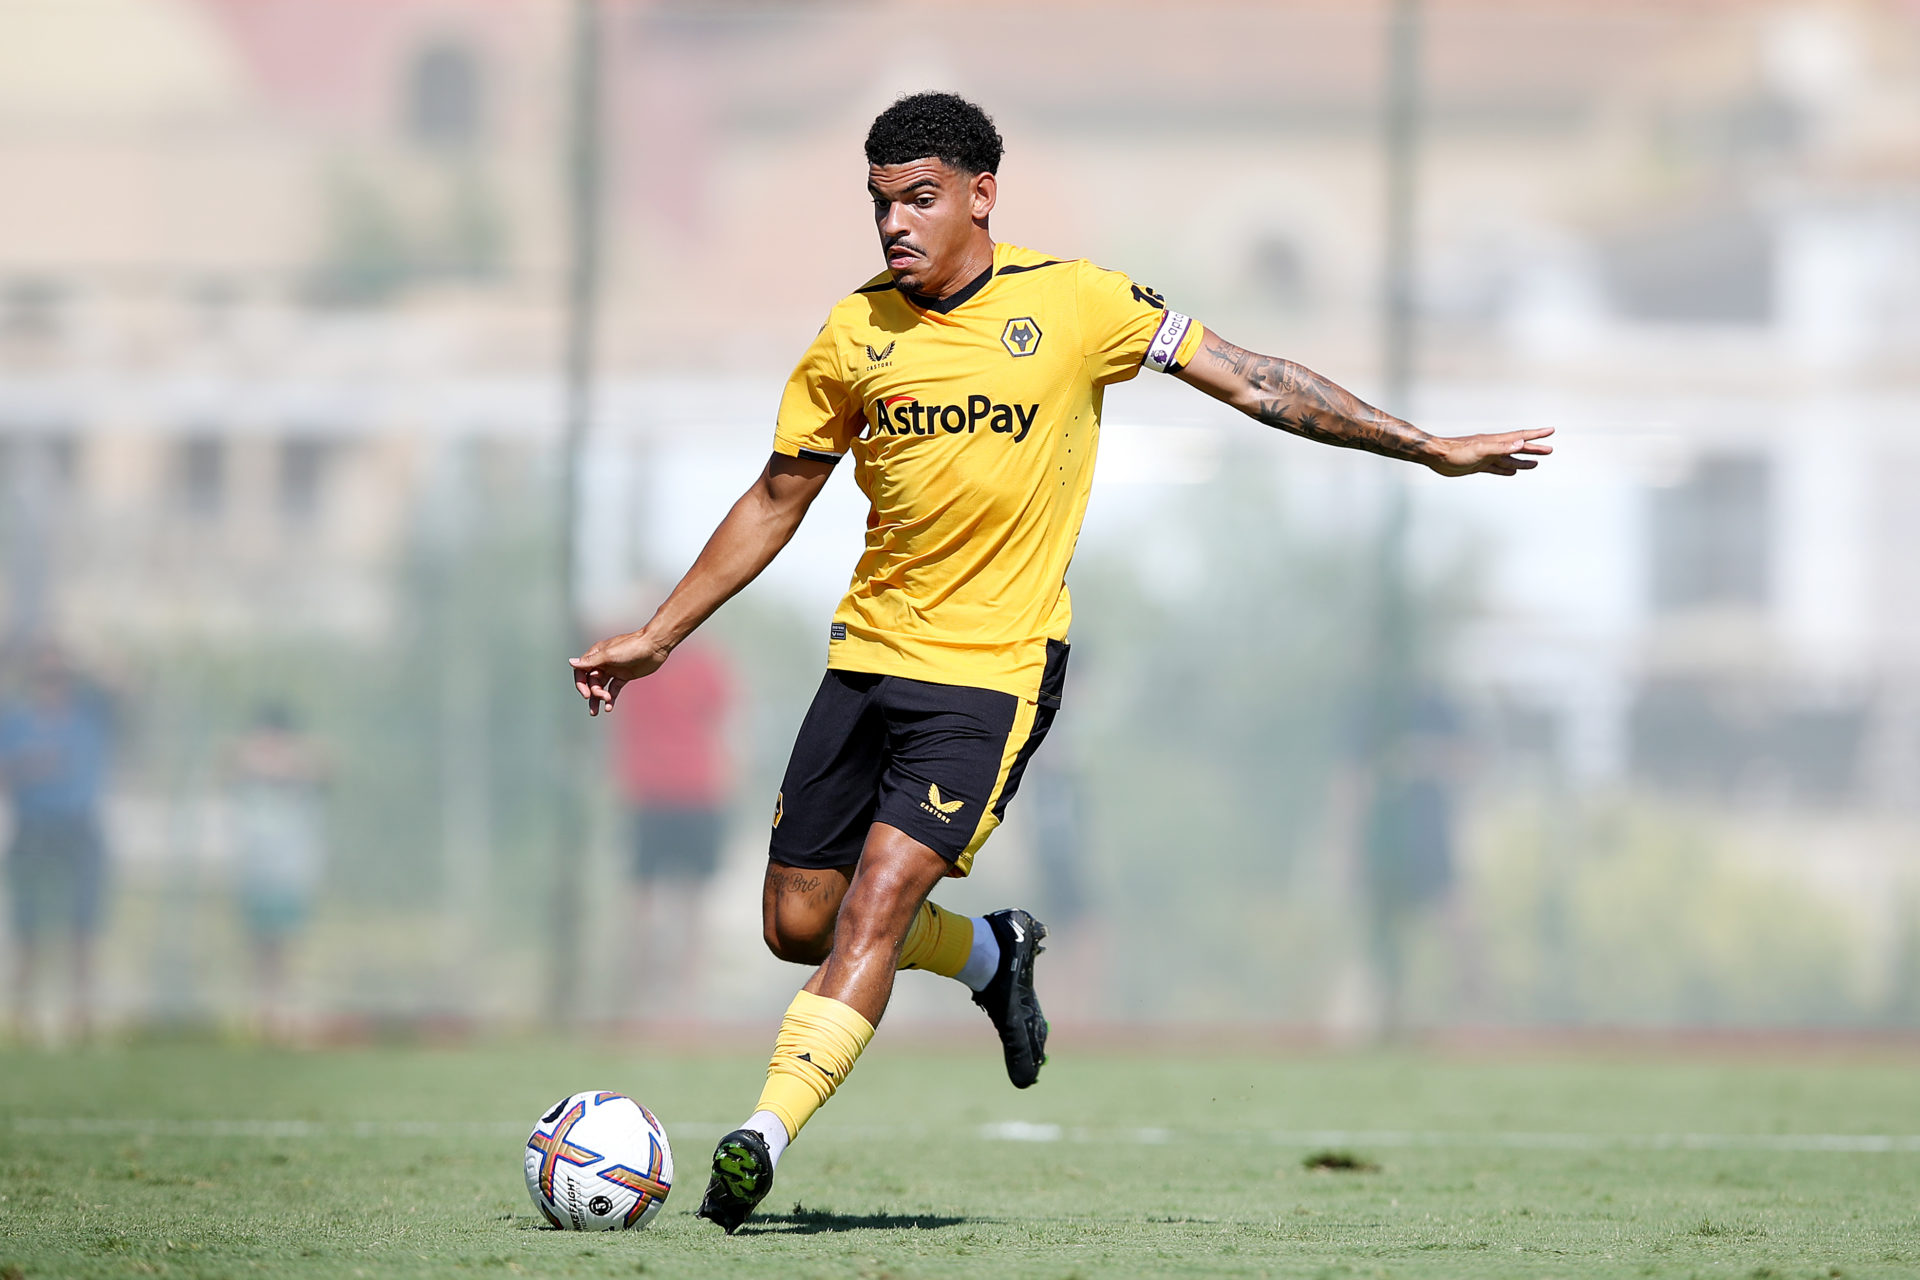 Gibbs-White wants Wolves stay